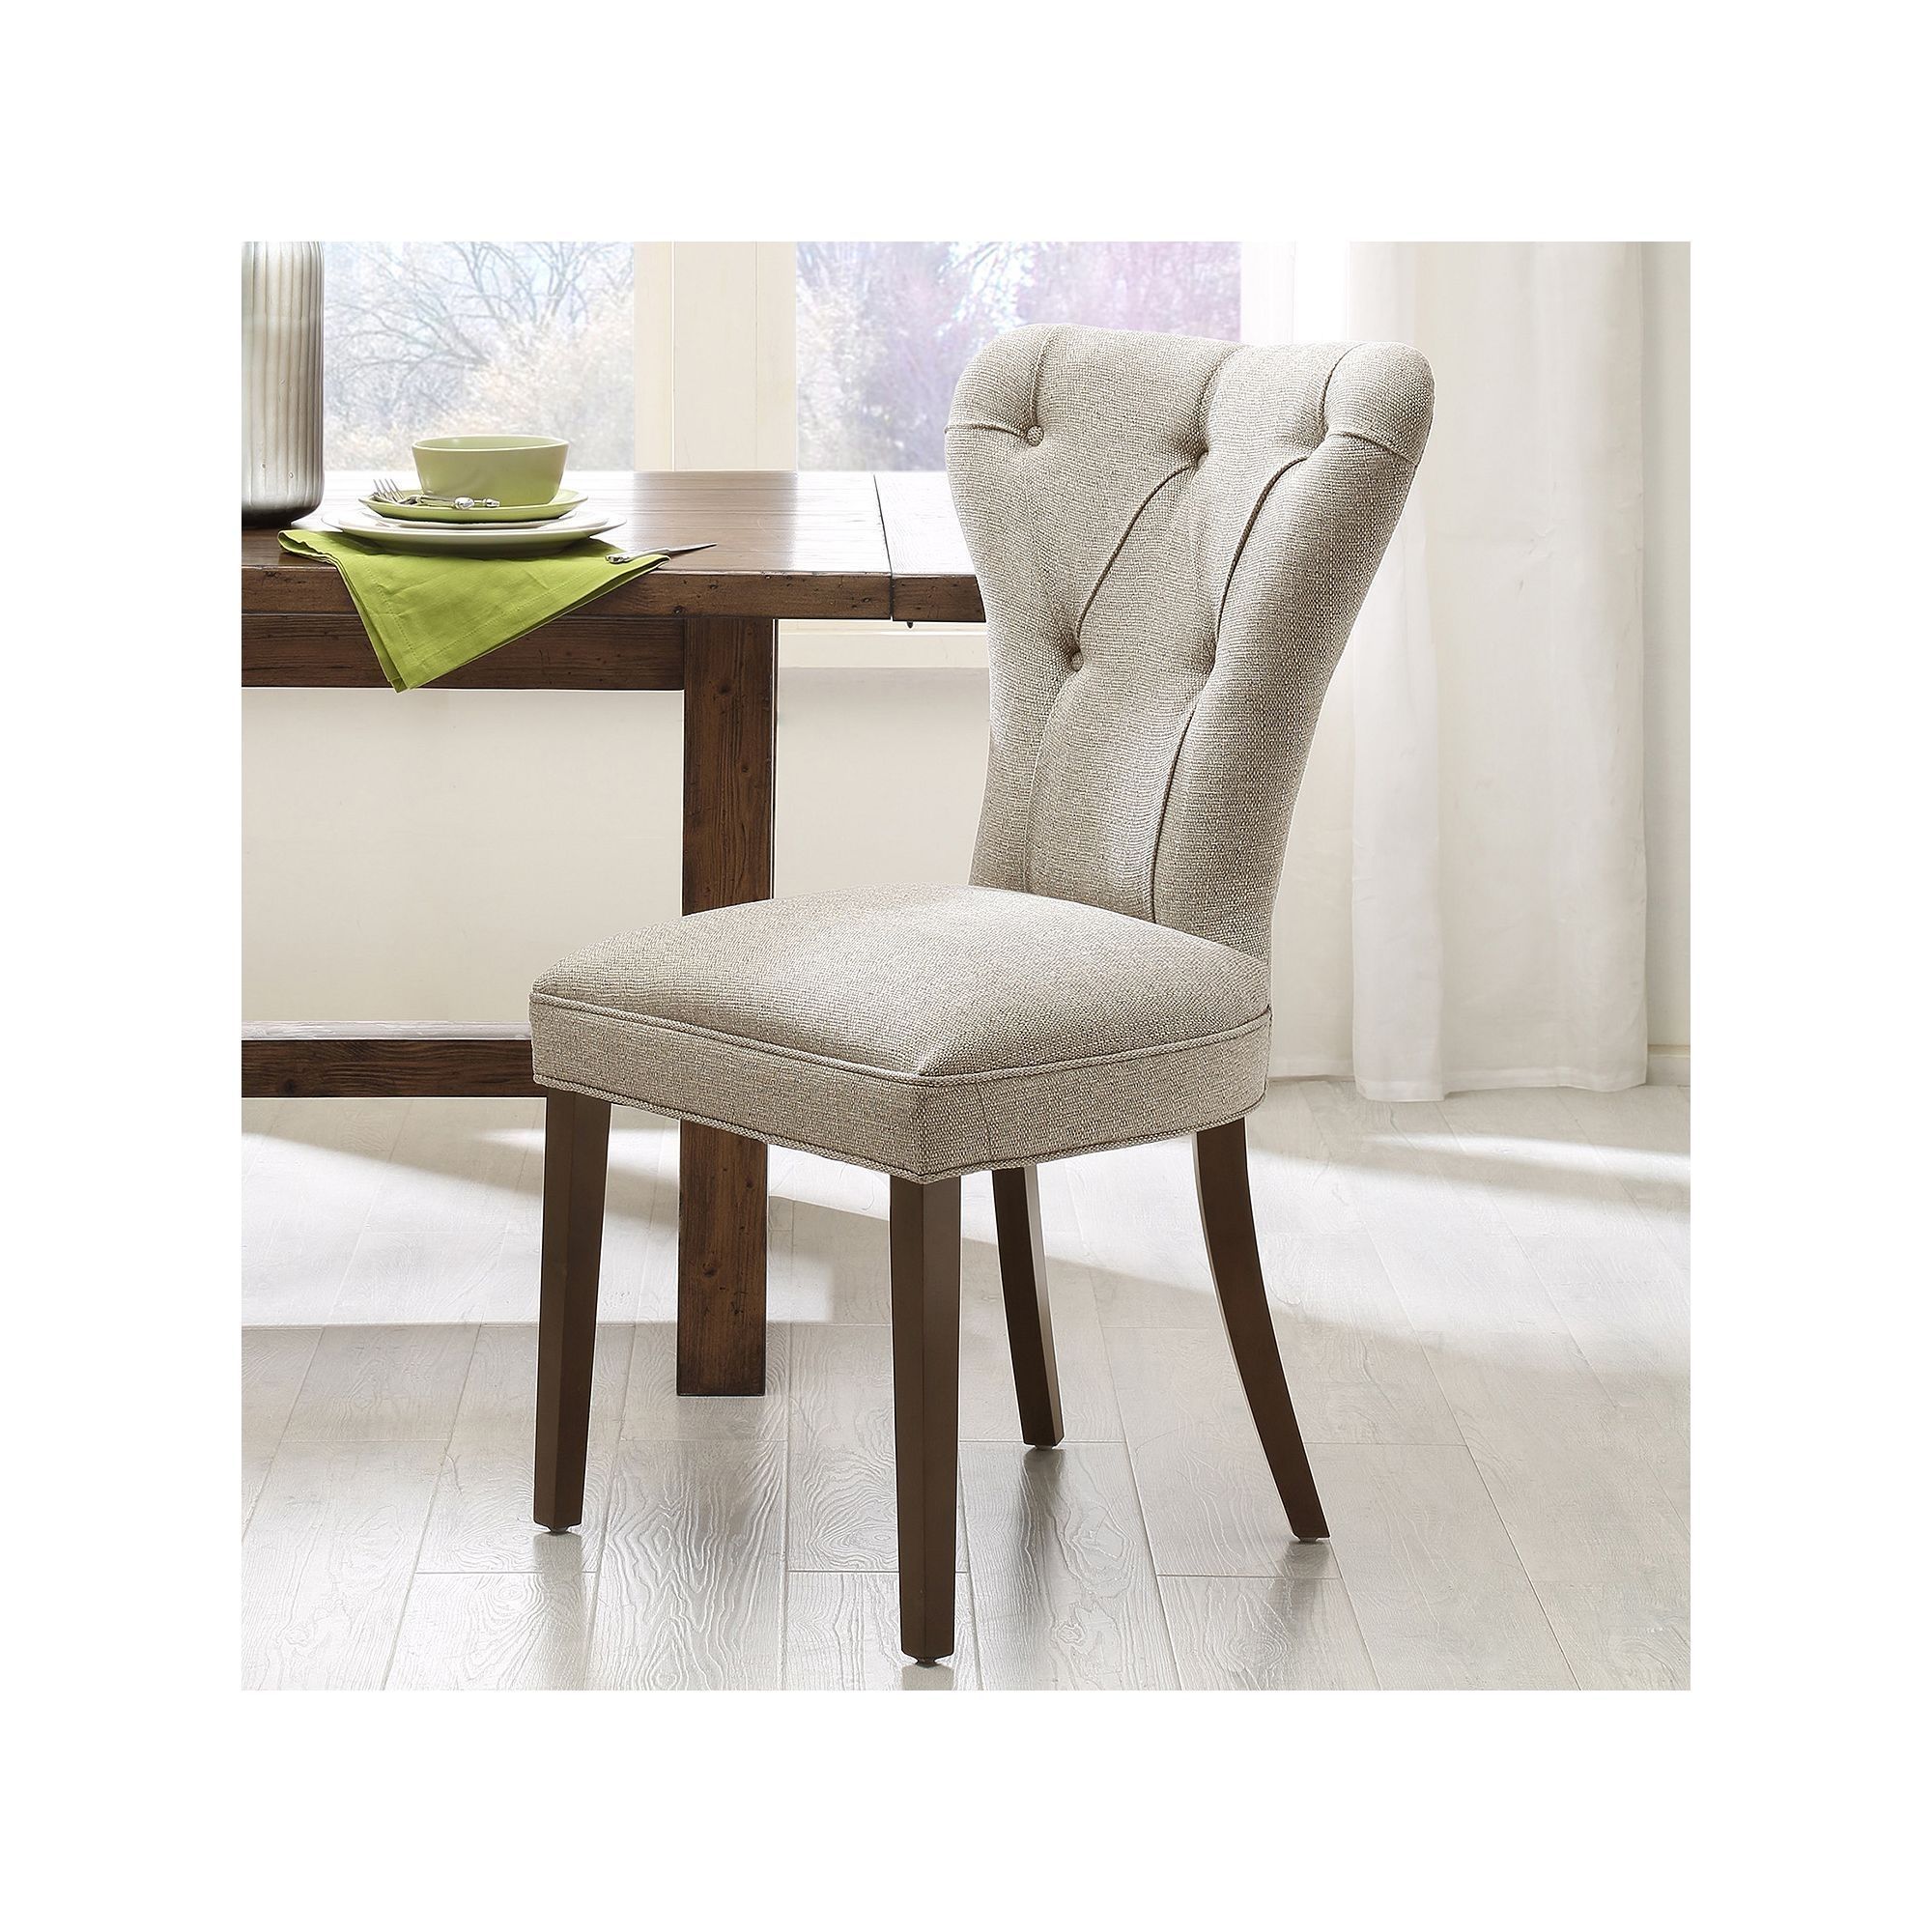 Caden Side Chairs Inside Fashionable Madison Park 2 Piece Jocelyn Dining Chair Set, Beig/green (beig (View 13 of 20)